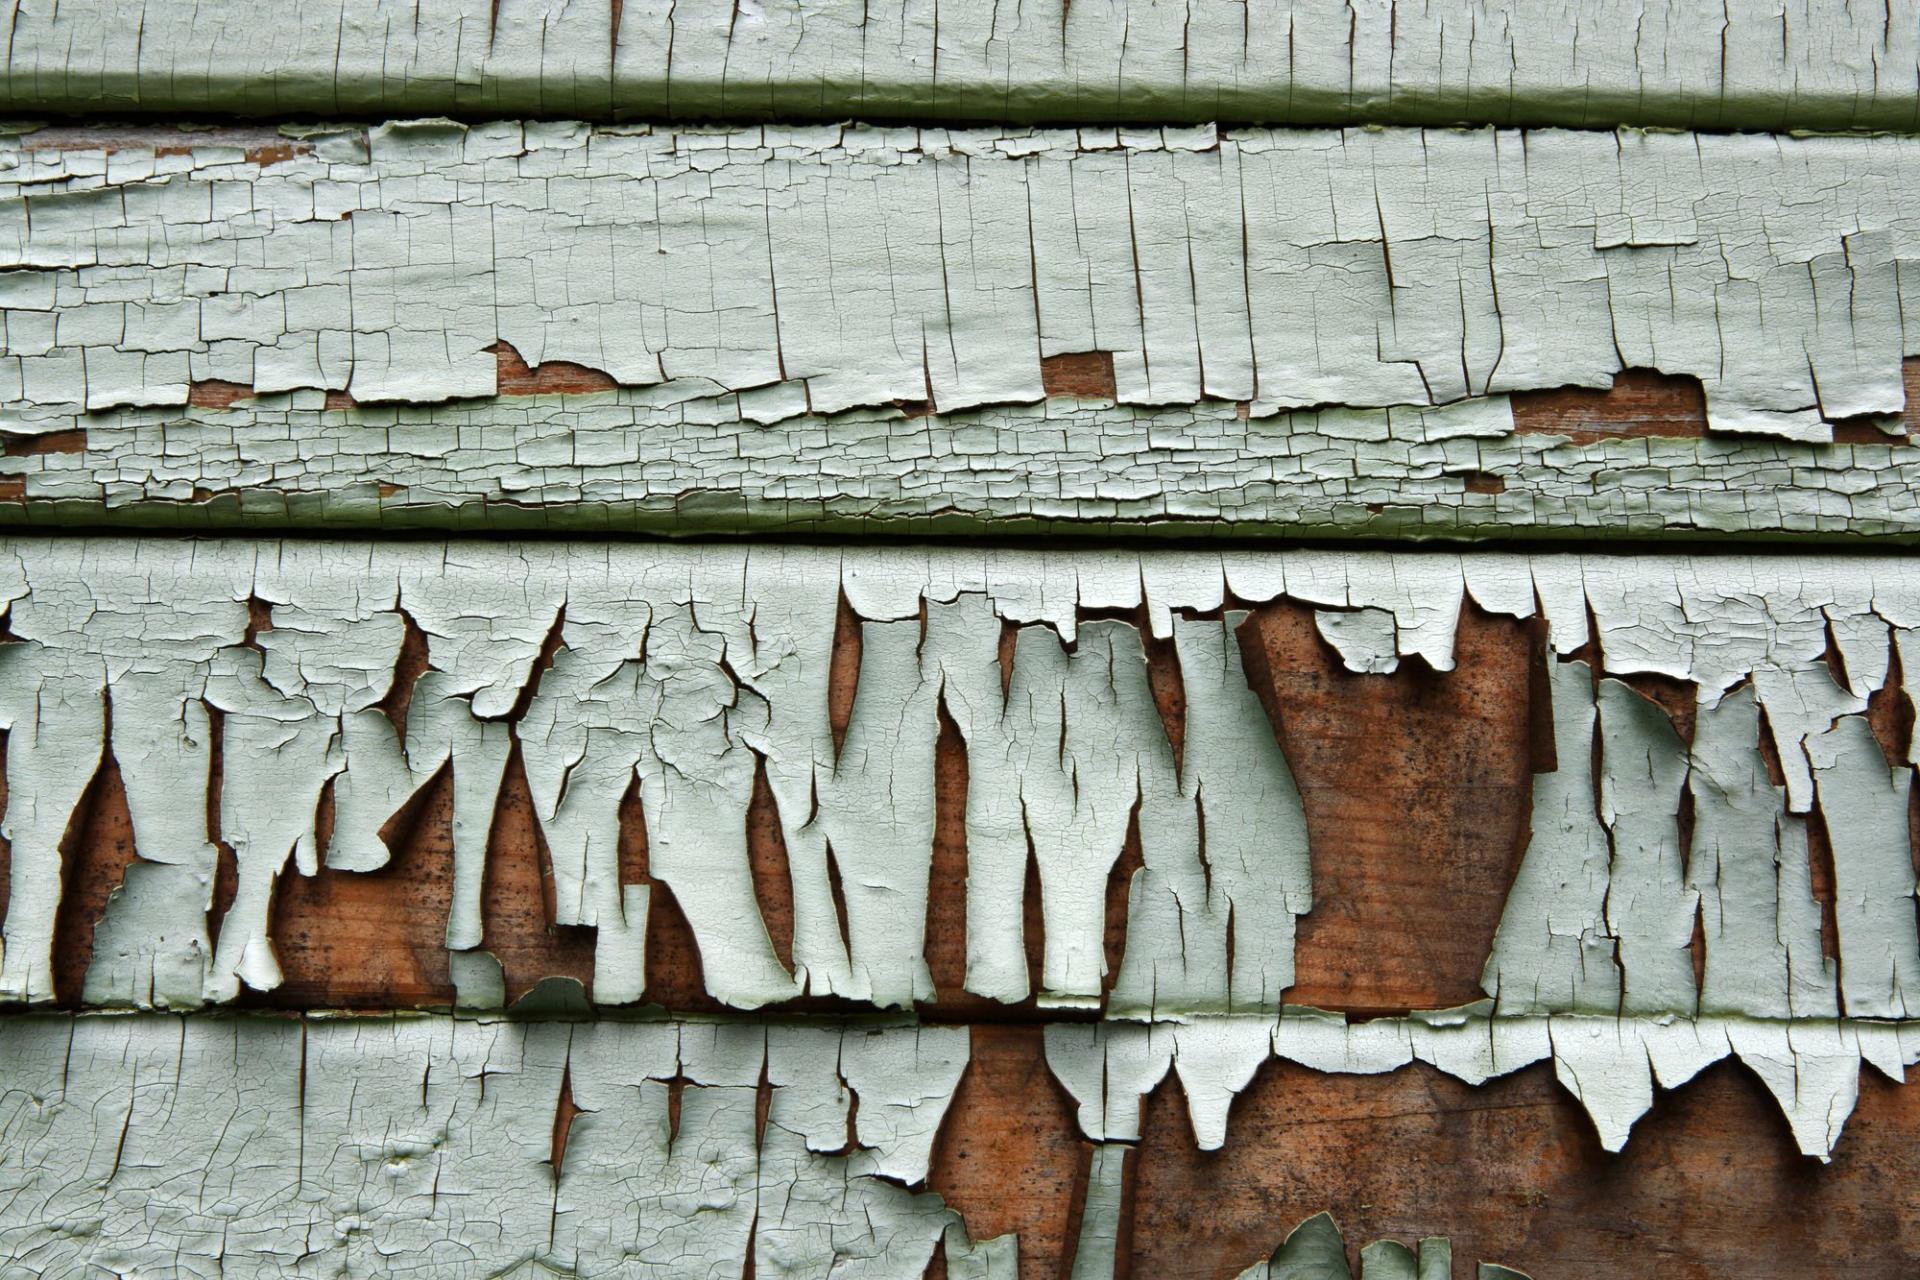 Home siding in need of replacement - clapboard with peeling paint.